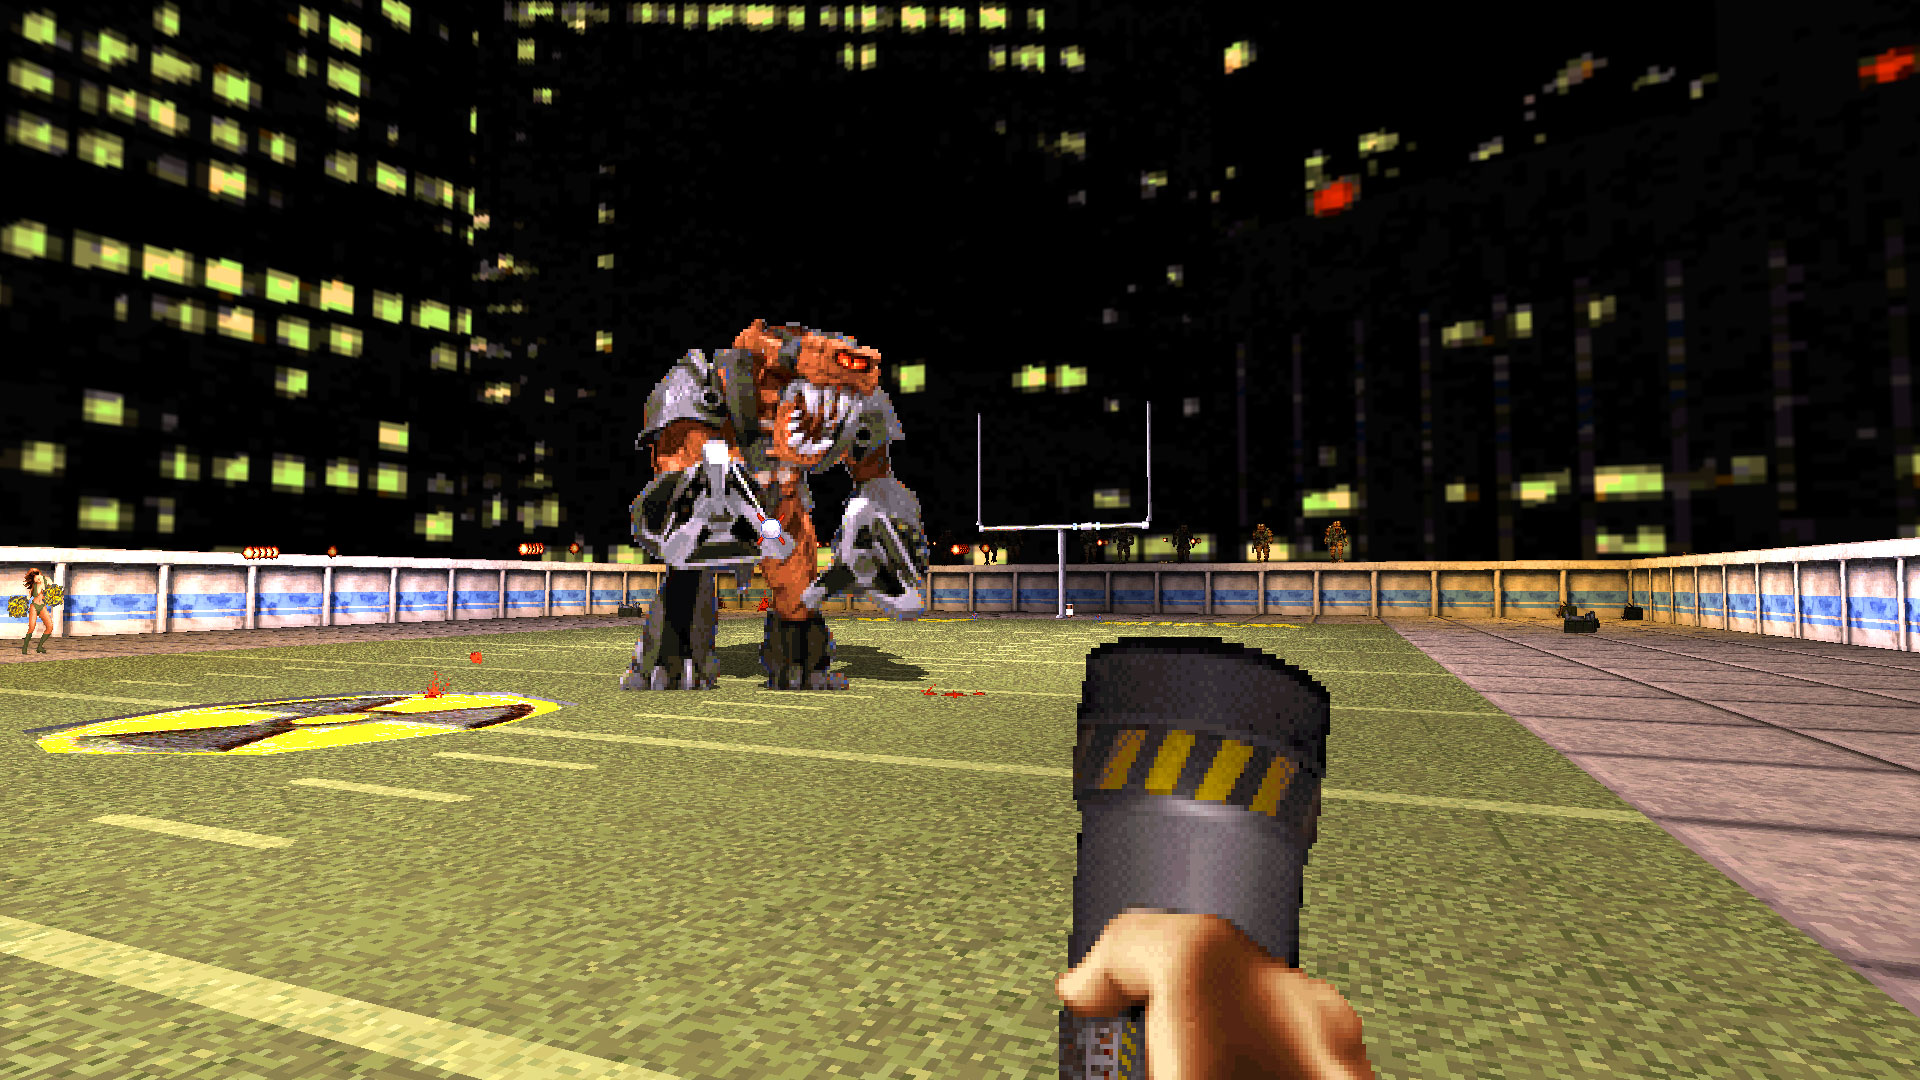 Duke Nukem 3D Returns To Consoles And PC With An All-New Episode